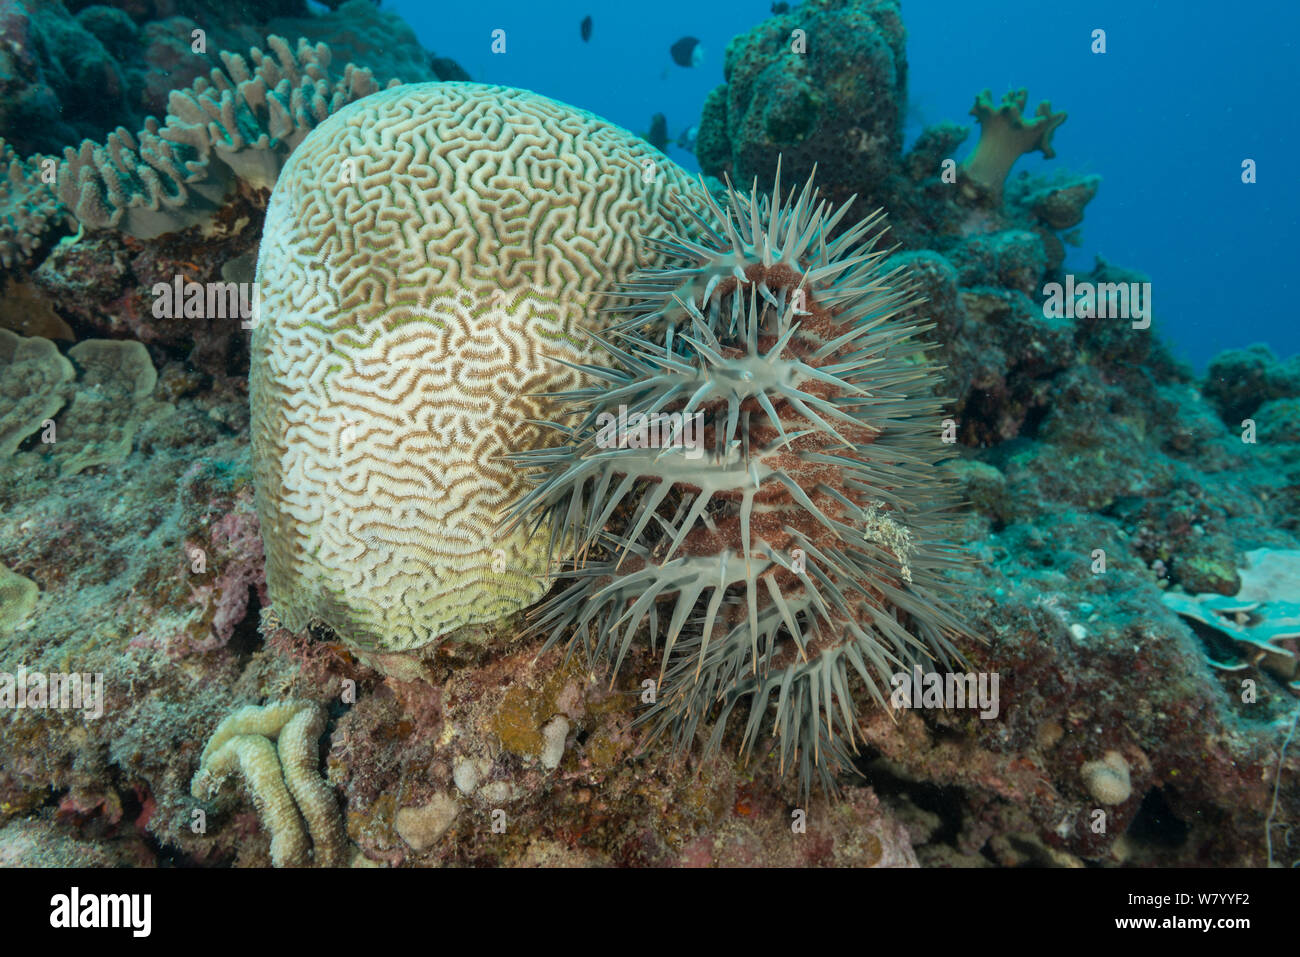 Crown of thorns starfish (Acanthaster planci) on the side of a Platygyra coral and digesting it with its stomach. Great Barrier Reef, Queensland, Australia. Stock Photo